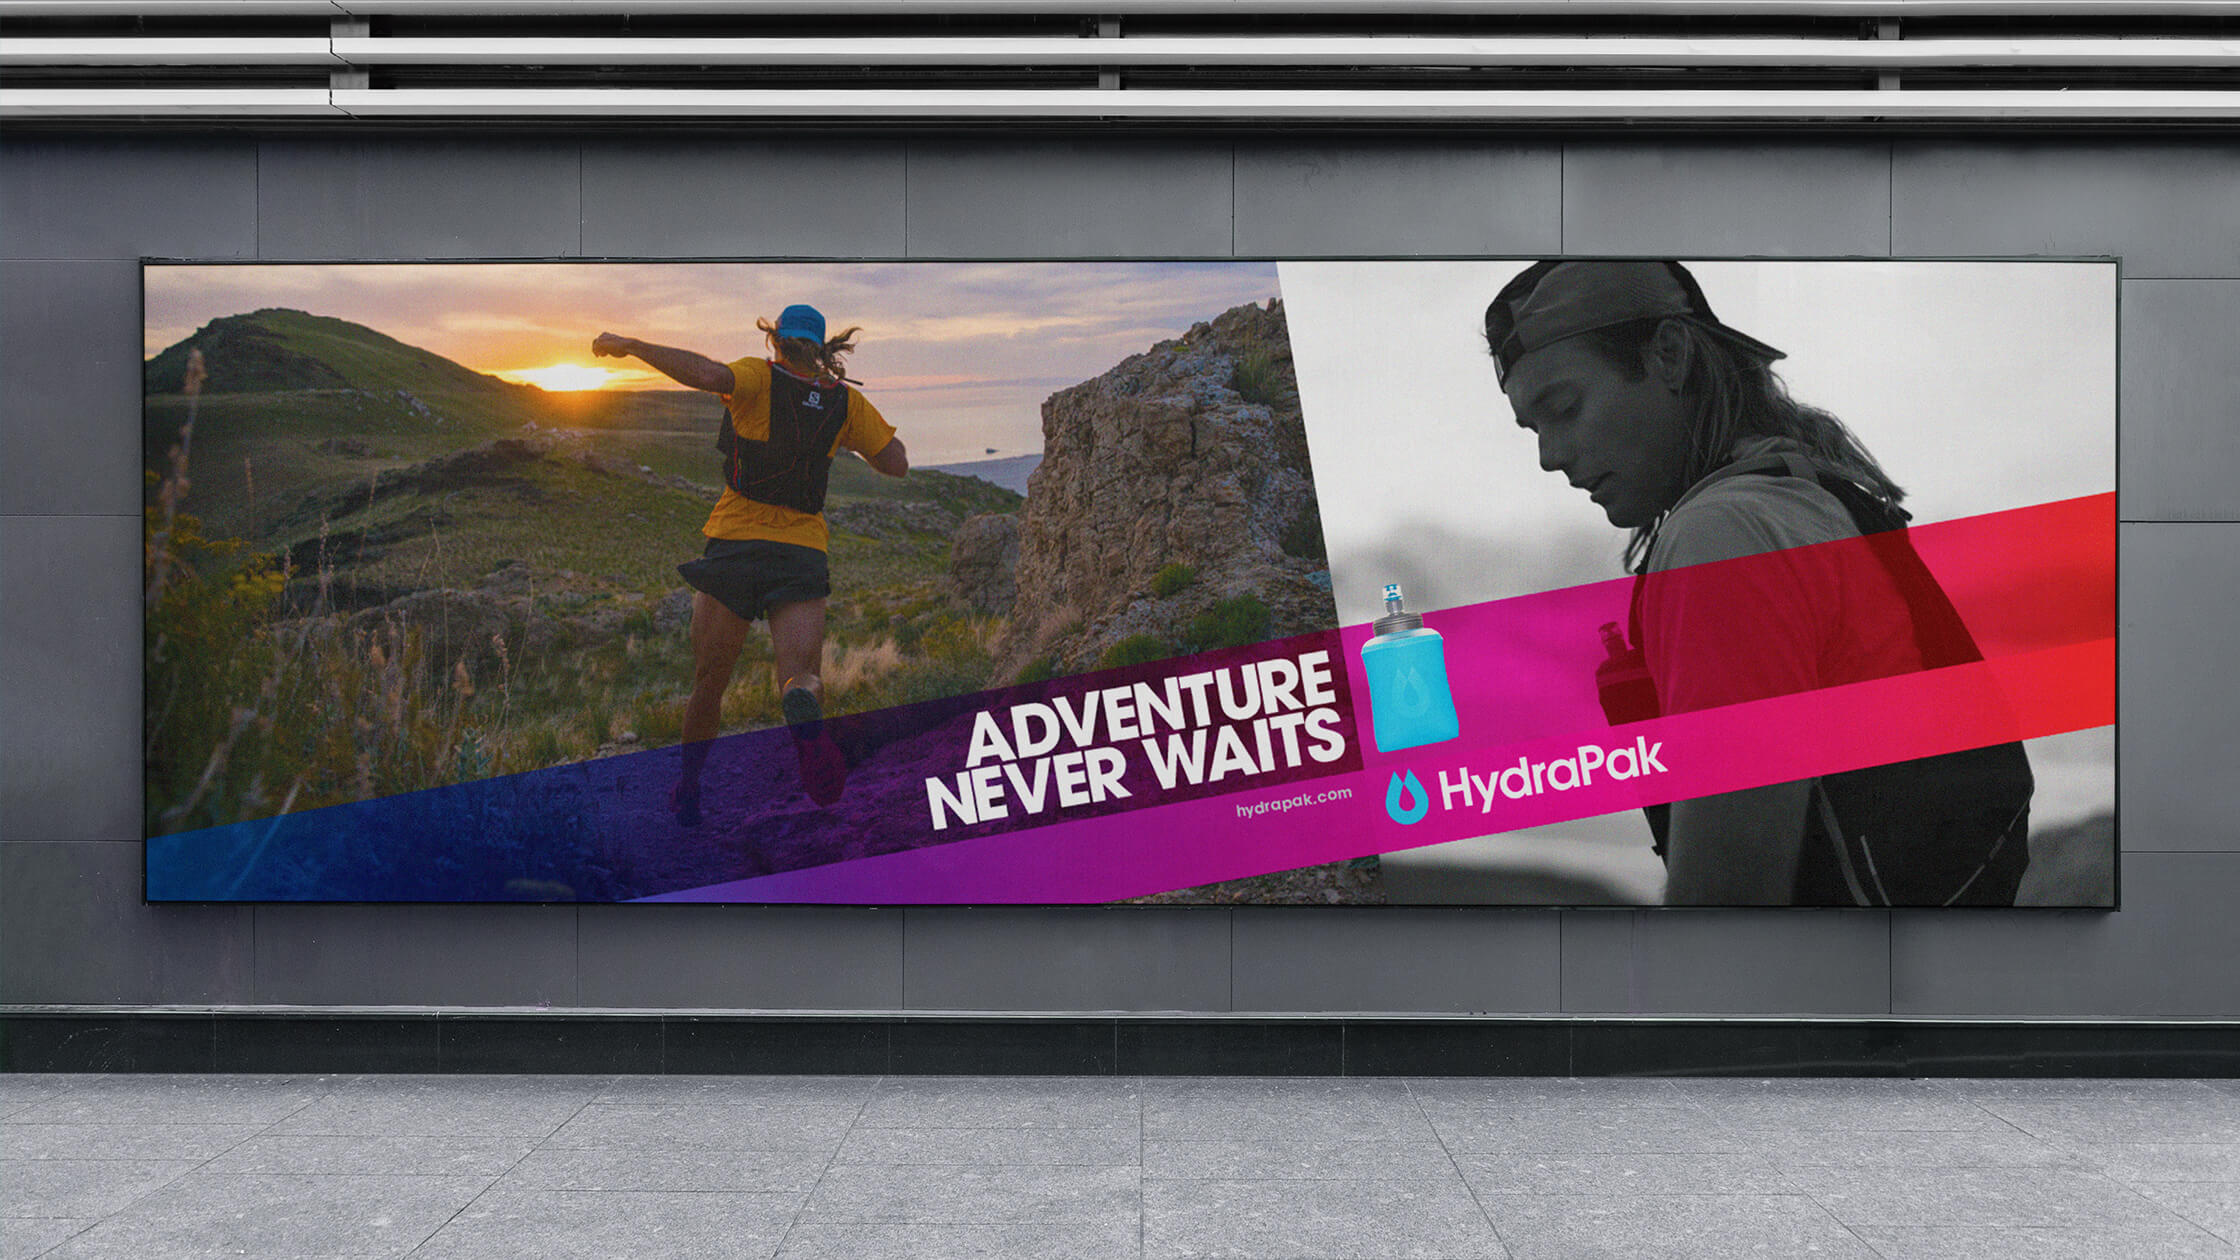 HydraPak adventure never waits advertising campaign with ultra runner